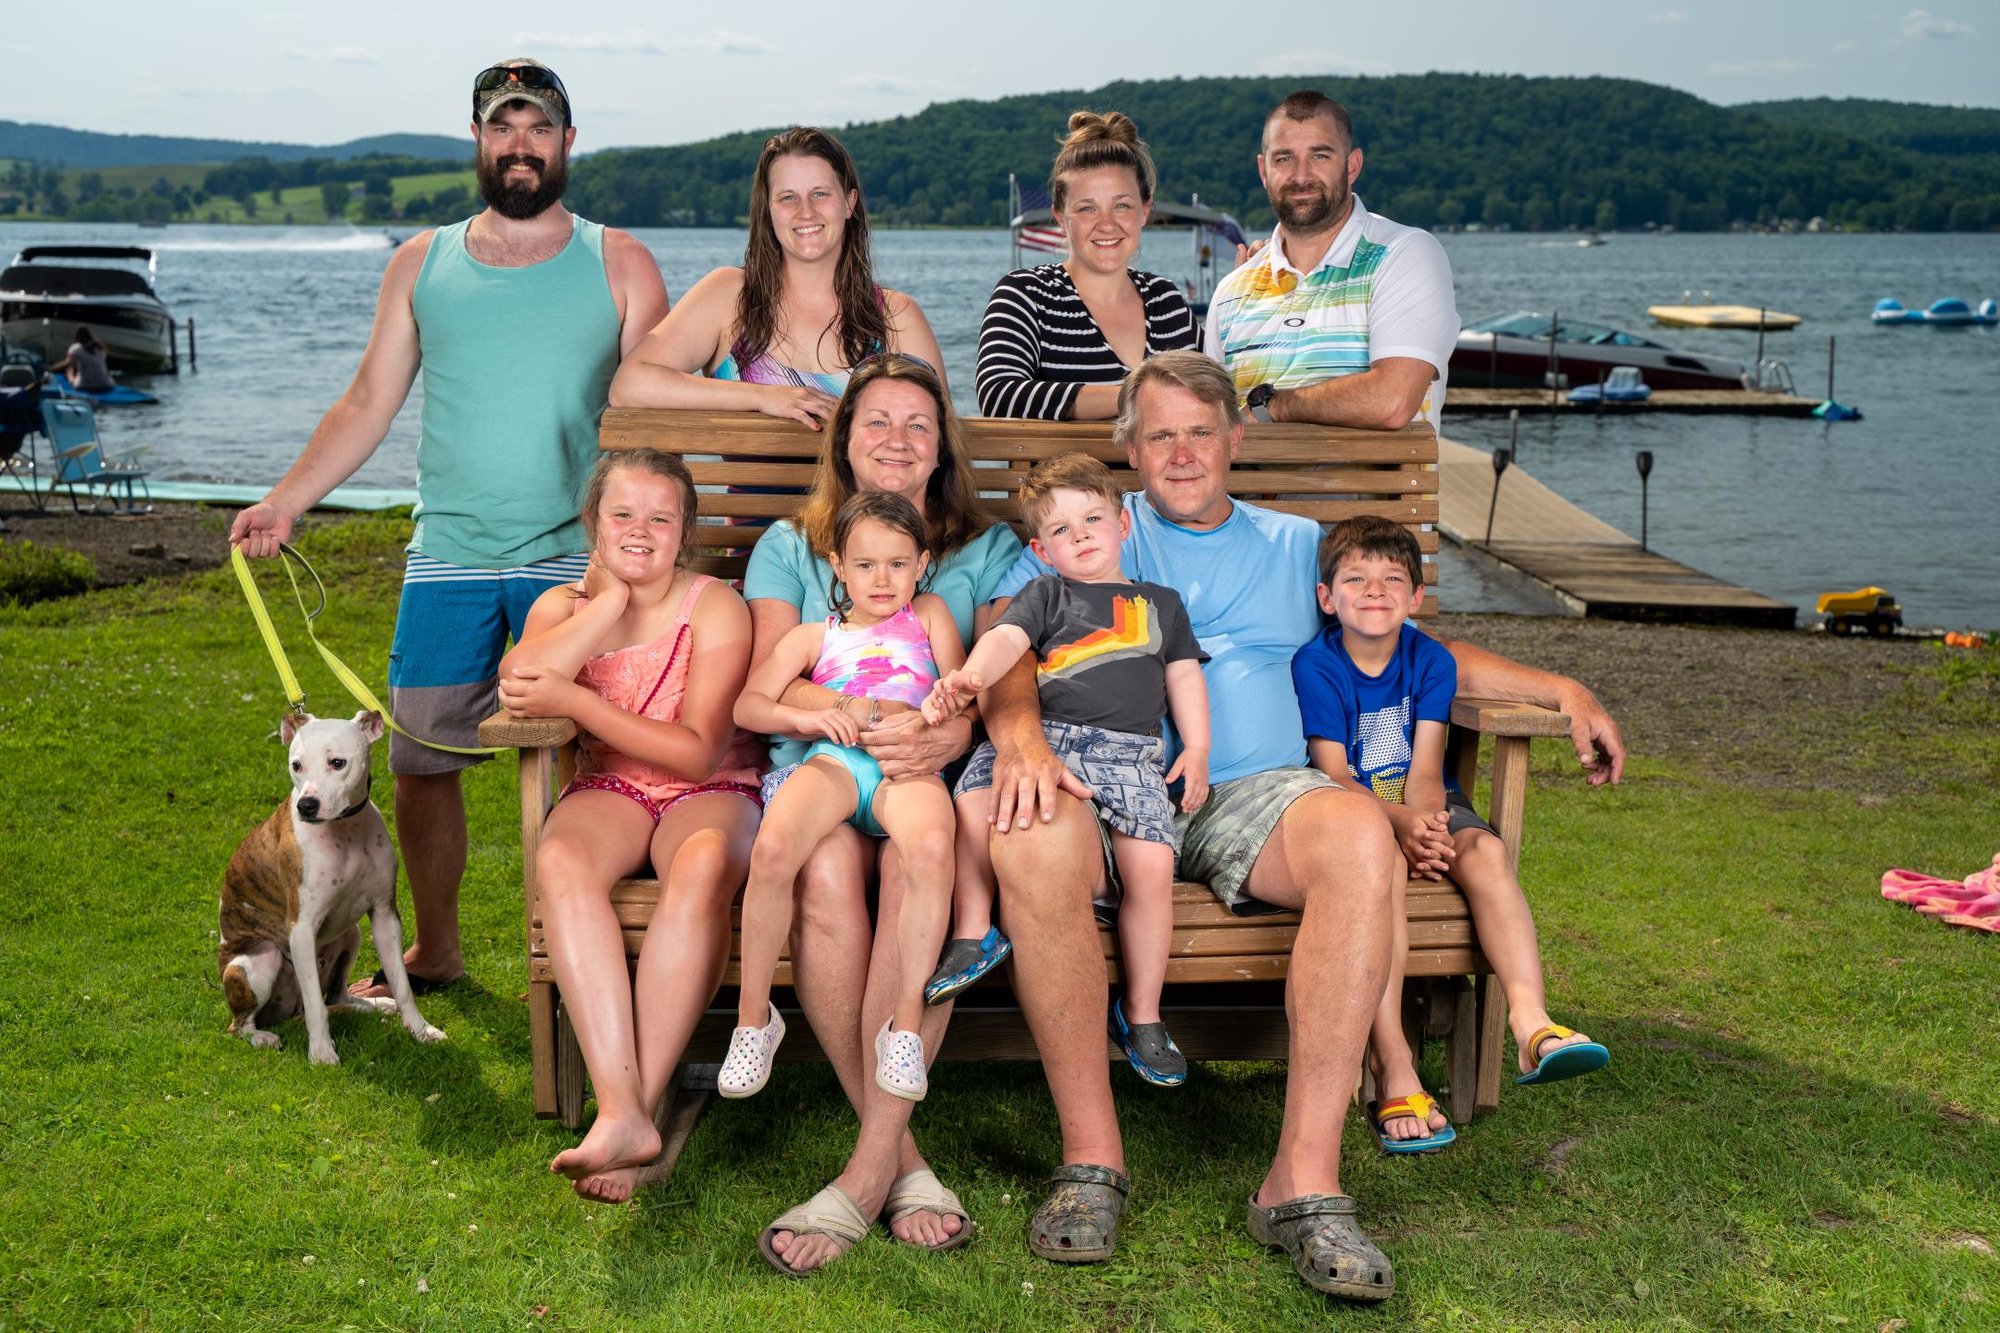 Deb Shafer and her family at their summer cabin in New York.